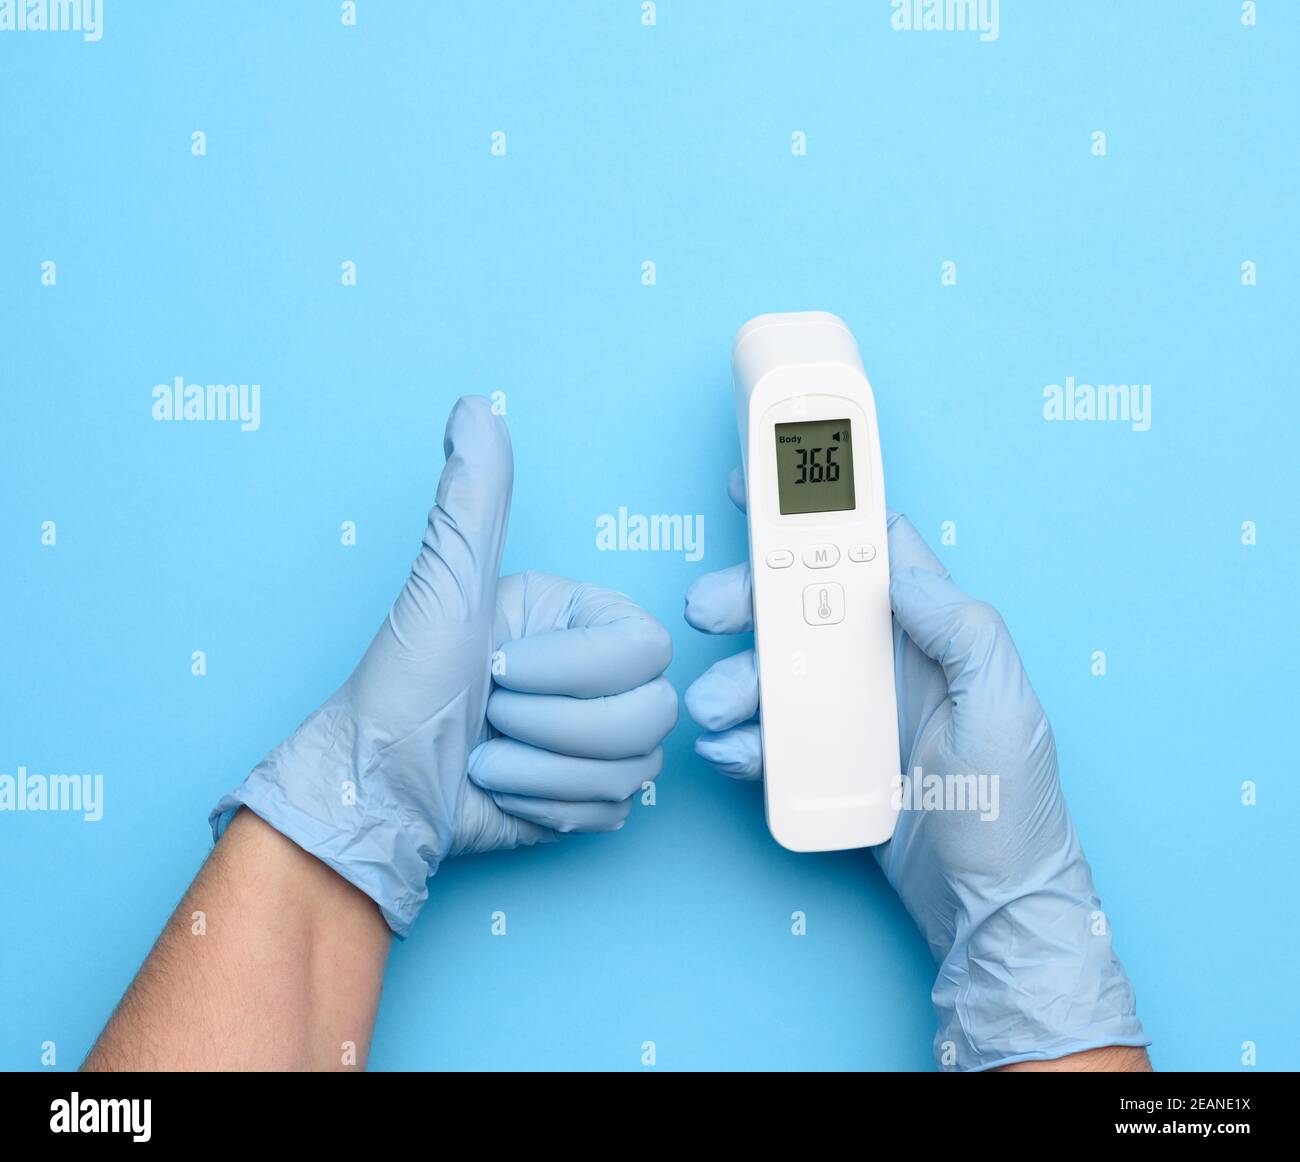 two hands in blue latex gloves hold an electronic thermometer to measure temperature Stock Photo